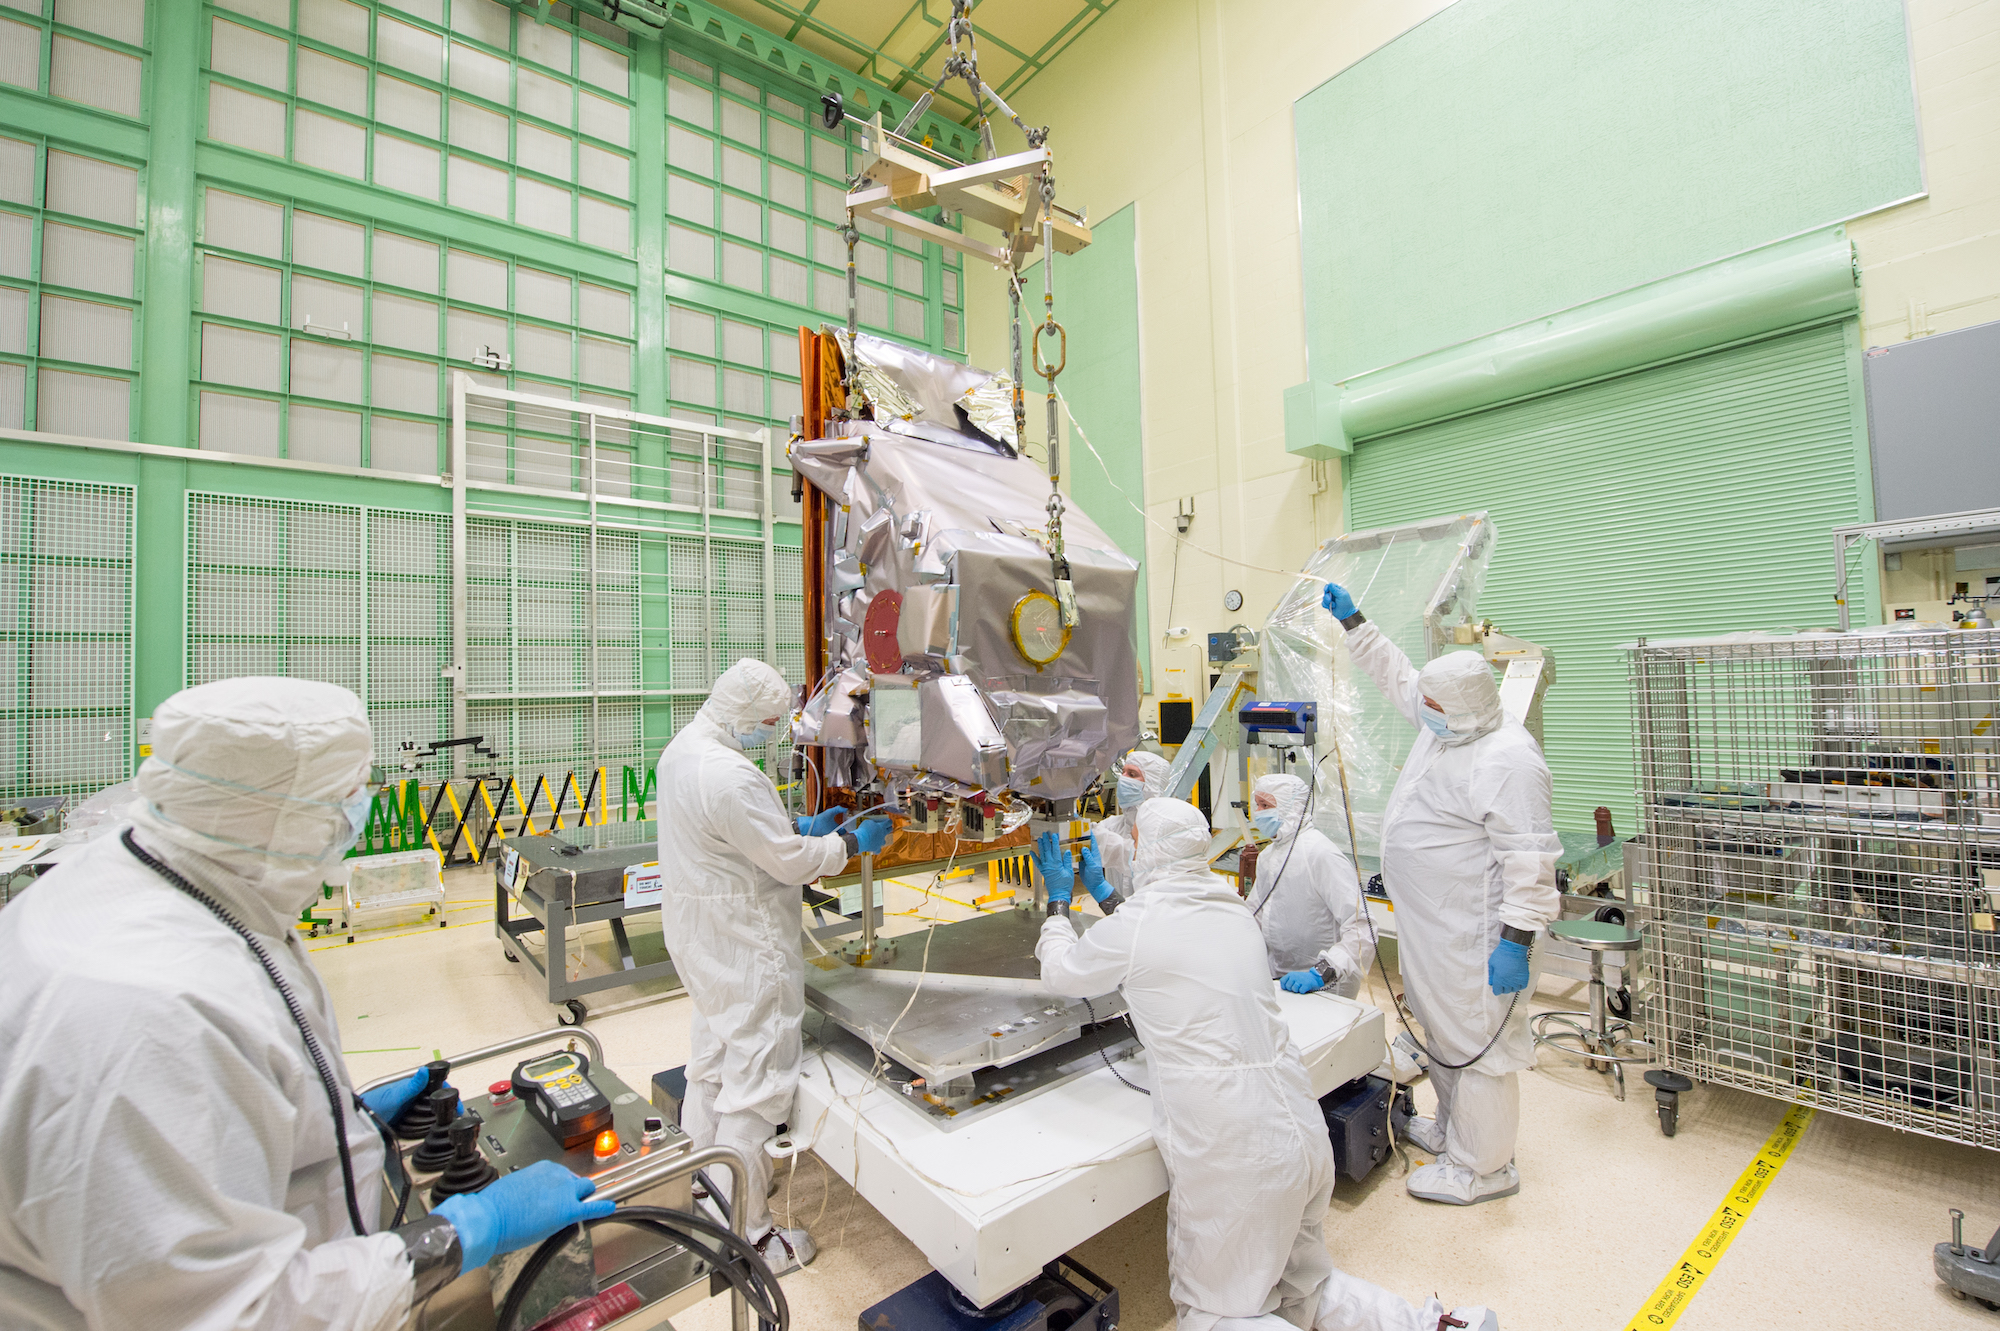 Engineers in white clean room suits with hoods and blue gloves and masks work on the TIRS-2 instrument inside a clean room with white and green walls. The instrument is wrapped in silver foil.